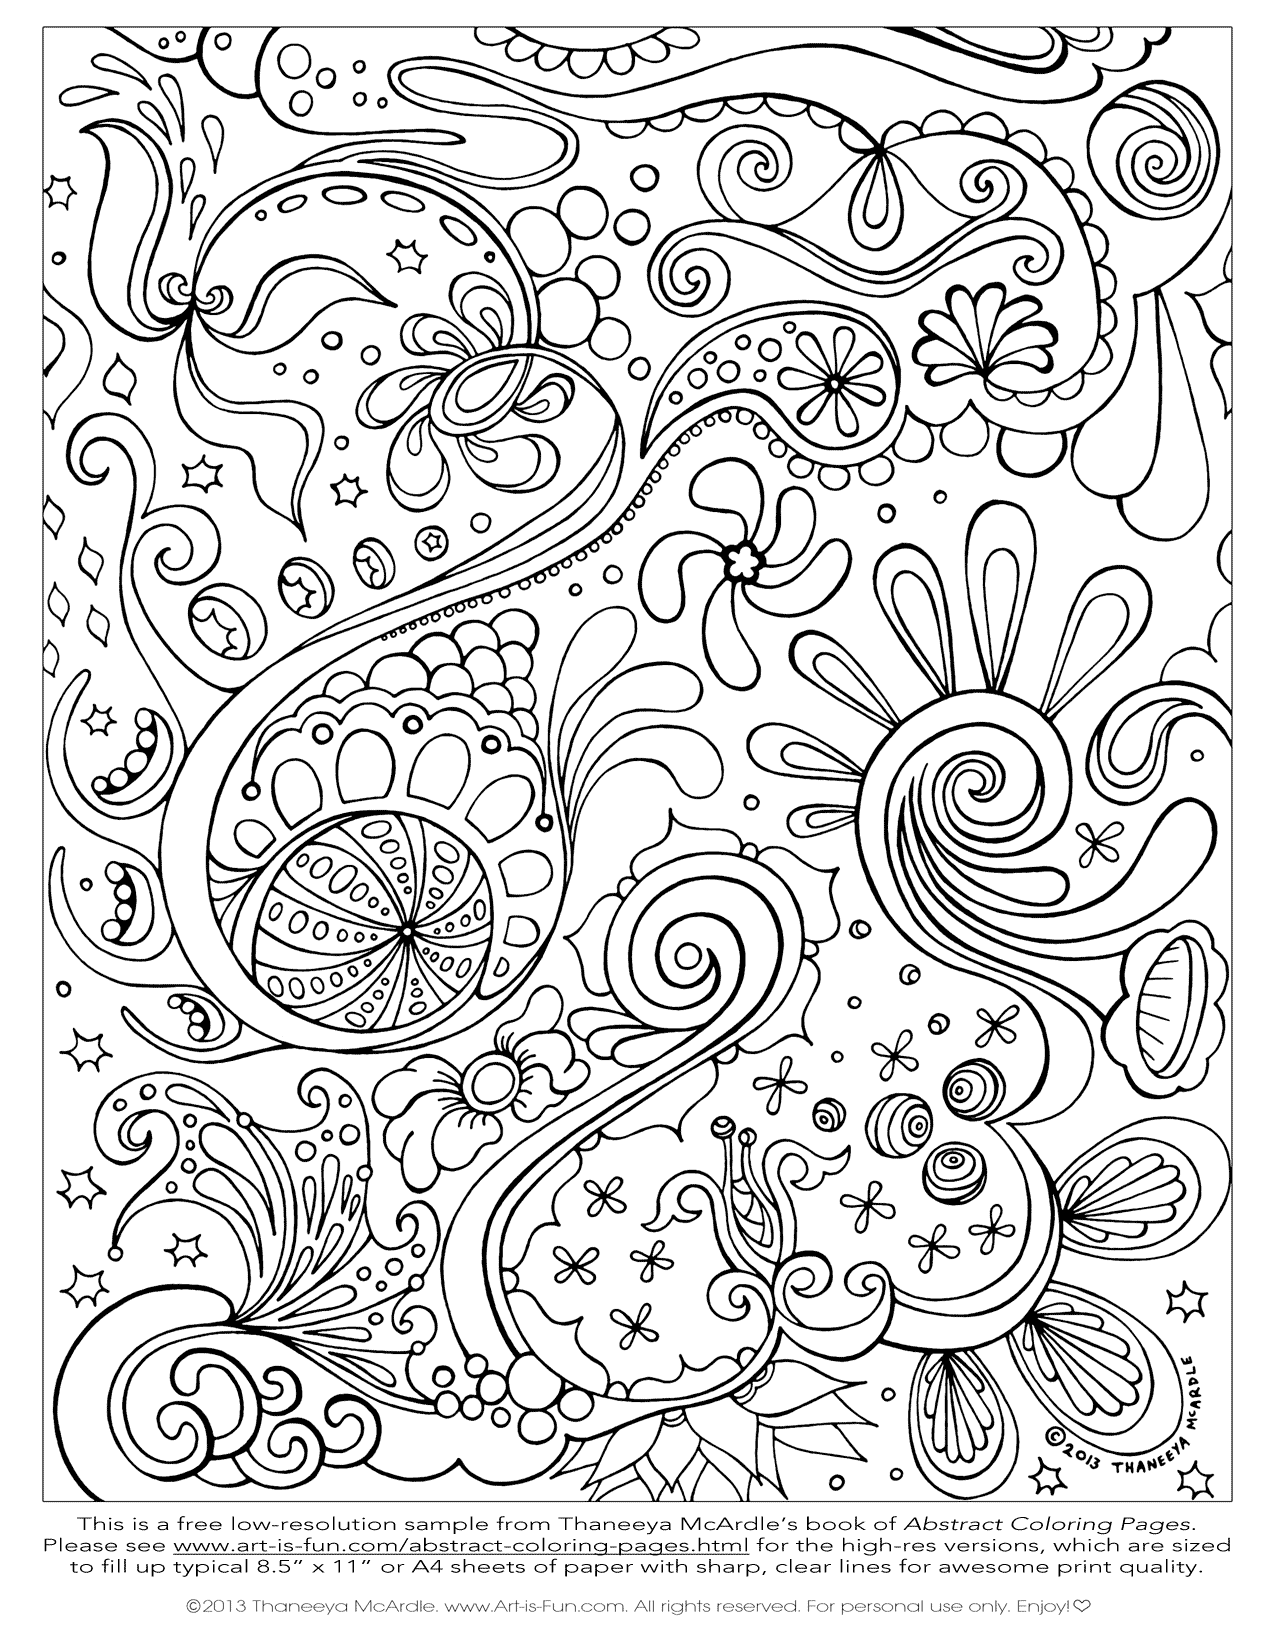 printable abstract coloring pages abstract doodle coloring page free printable coloring pages printable abstract coloring pages 